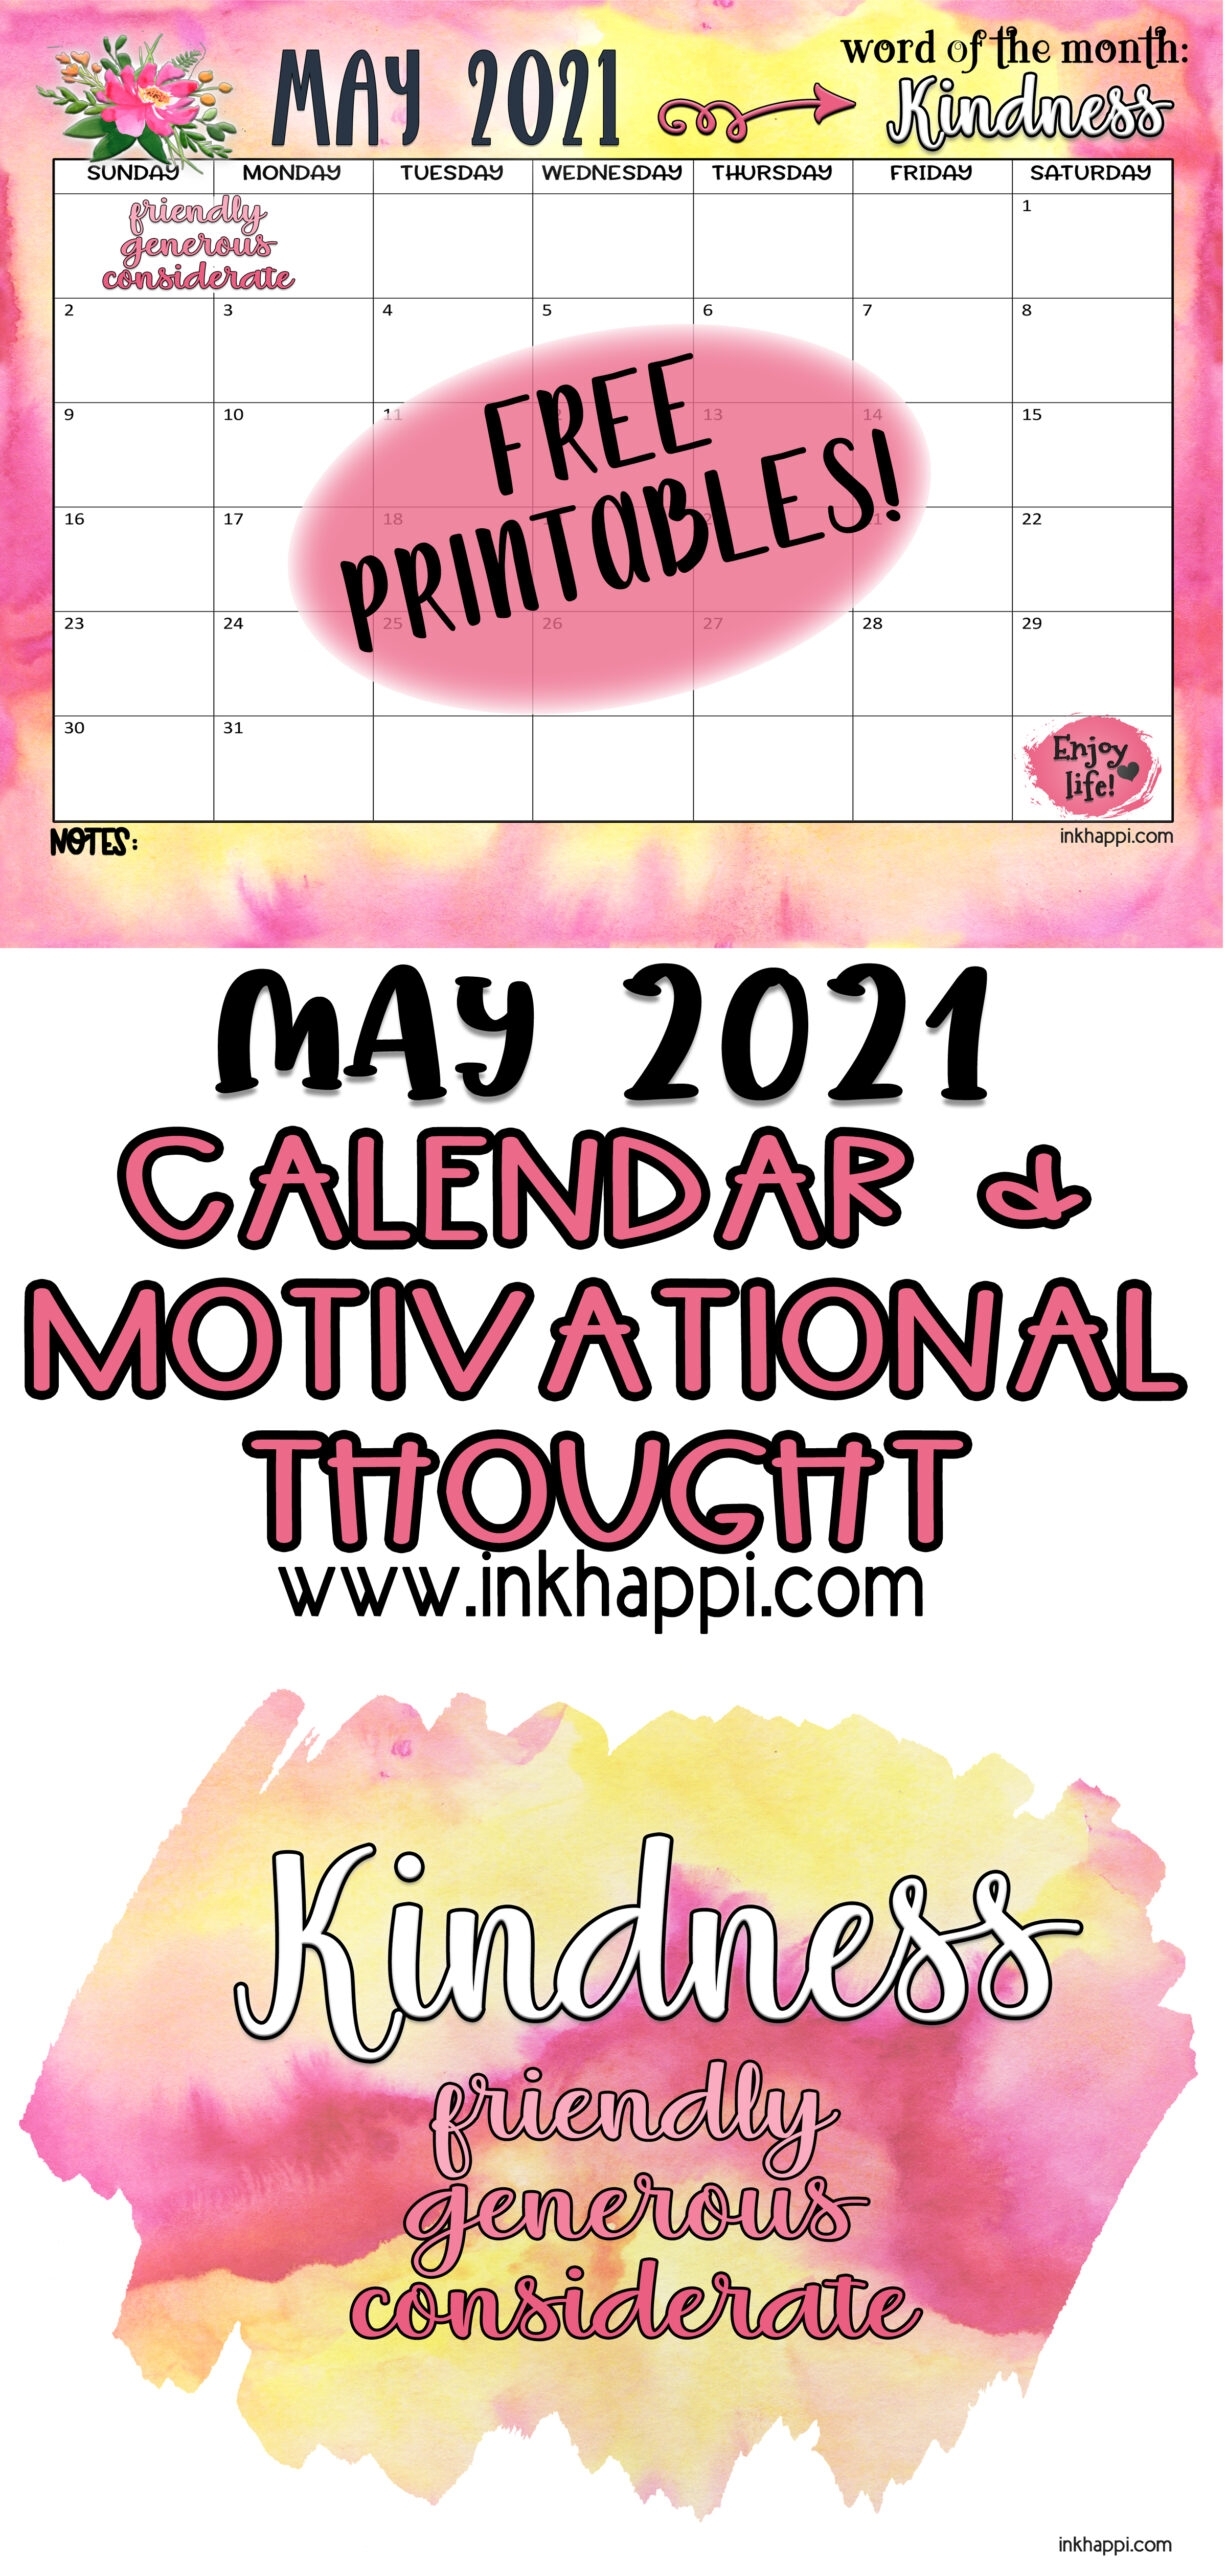 May 2021 Calendar And A Thought About Kindness - Inkhappi